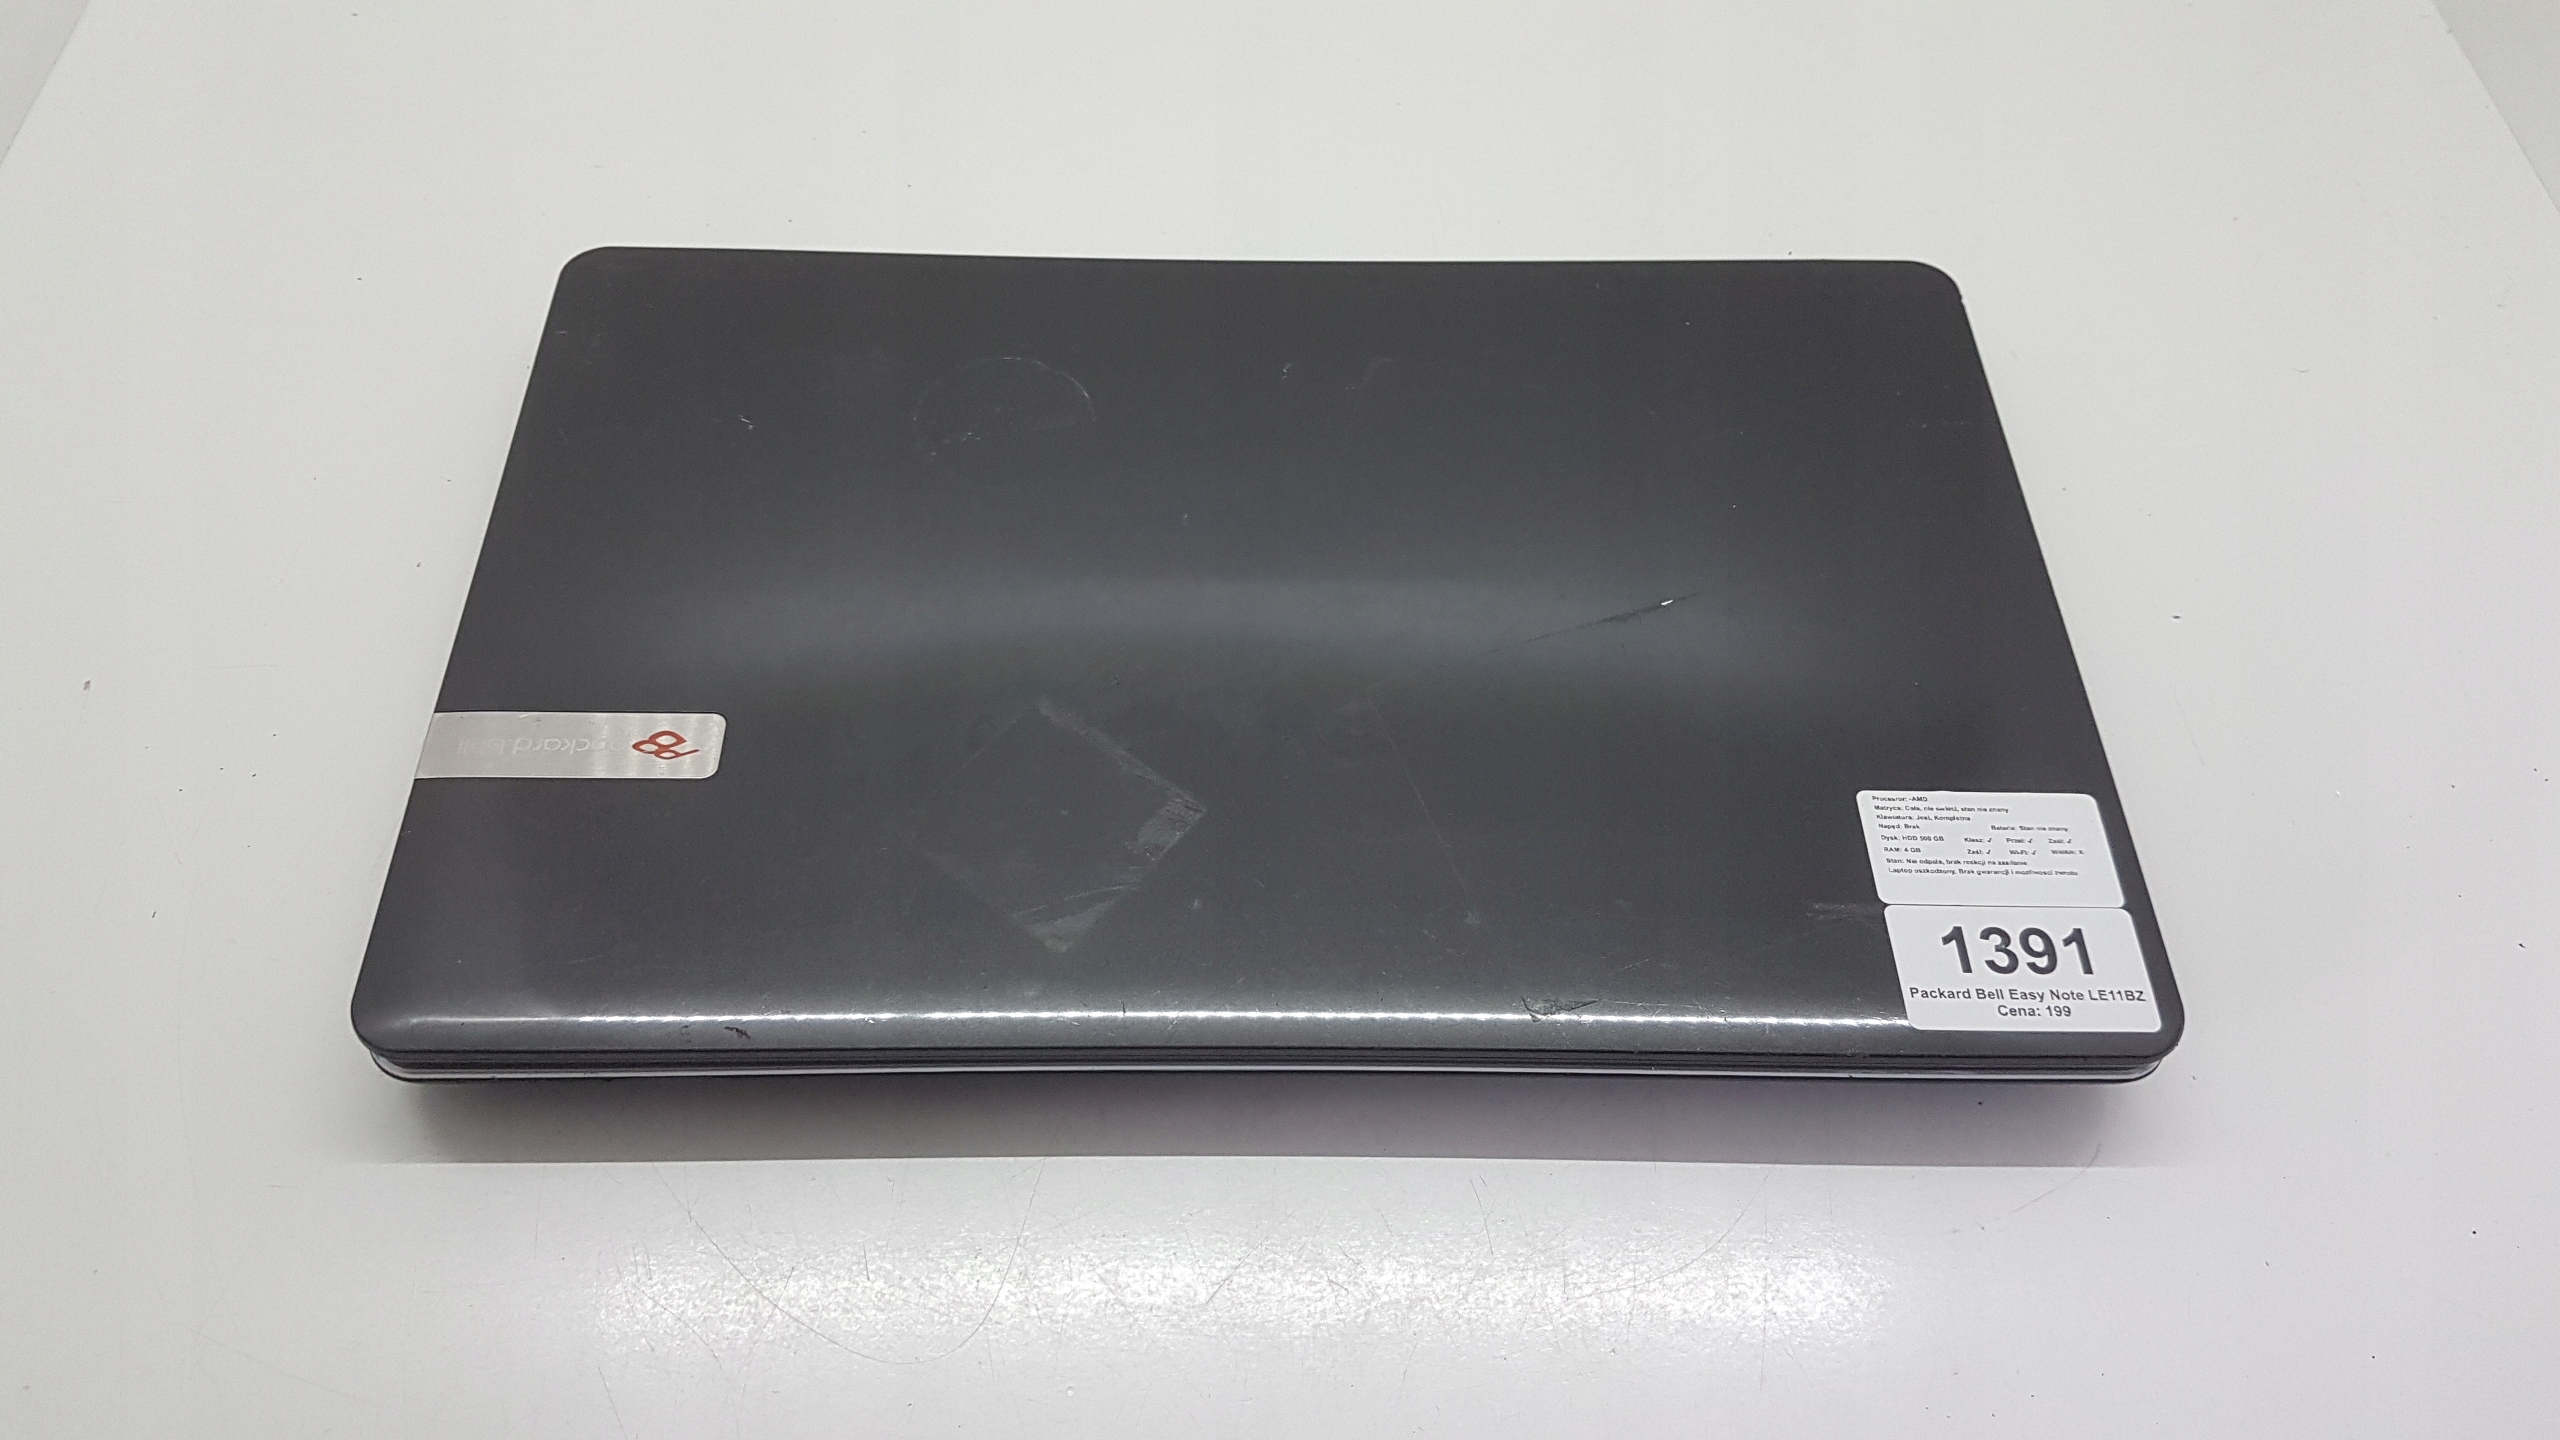 Notebook Packard Bell Easy Note LE11BZ (1391)